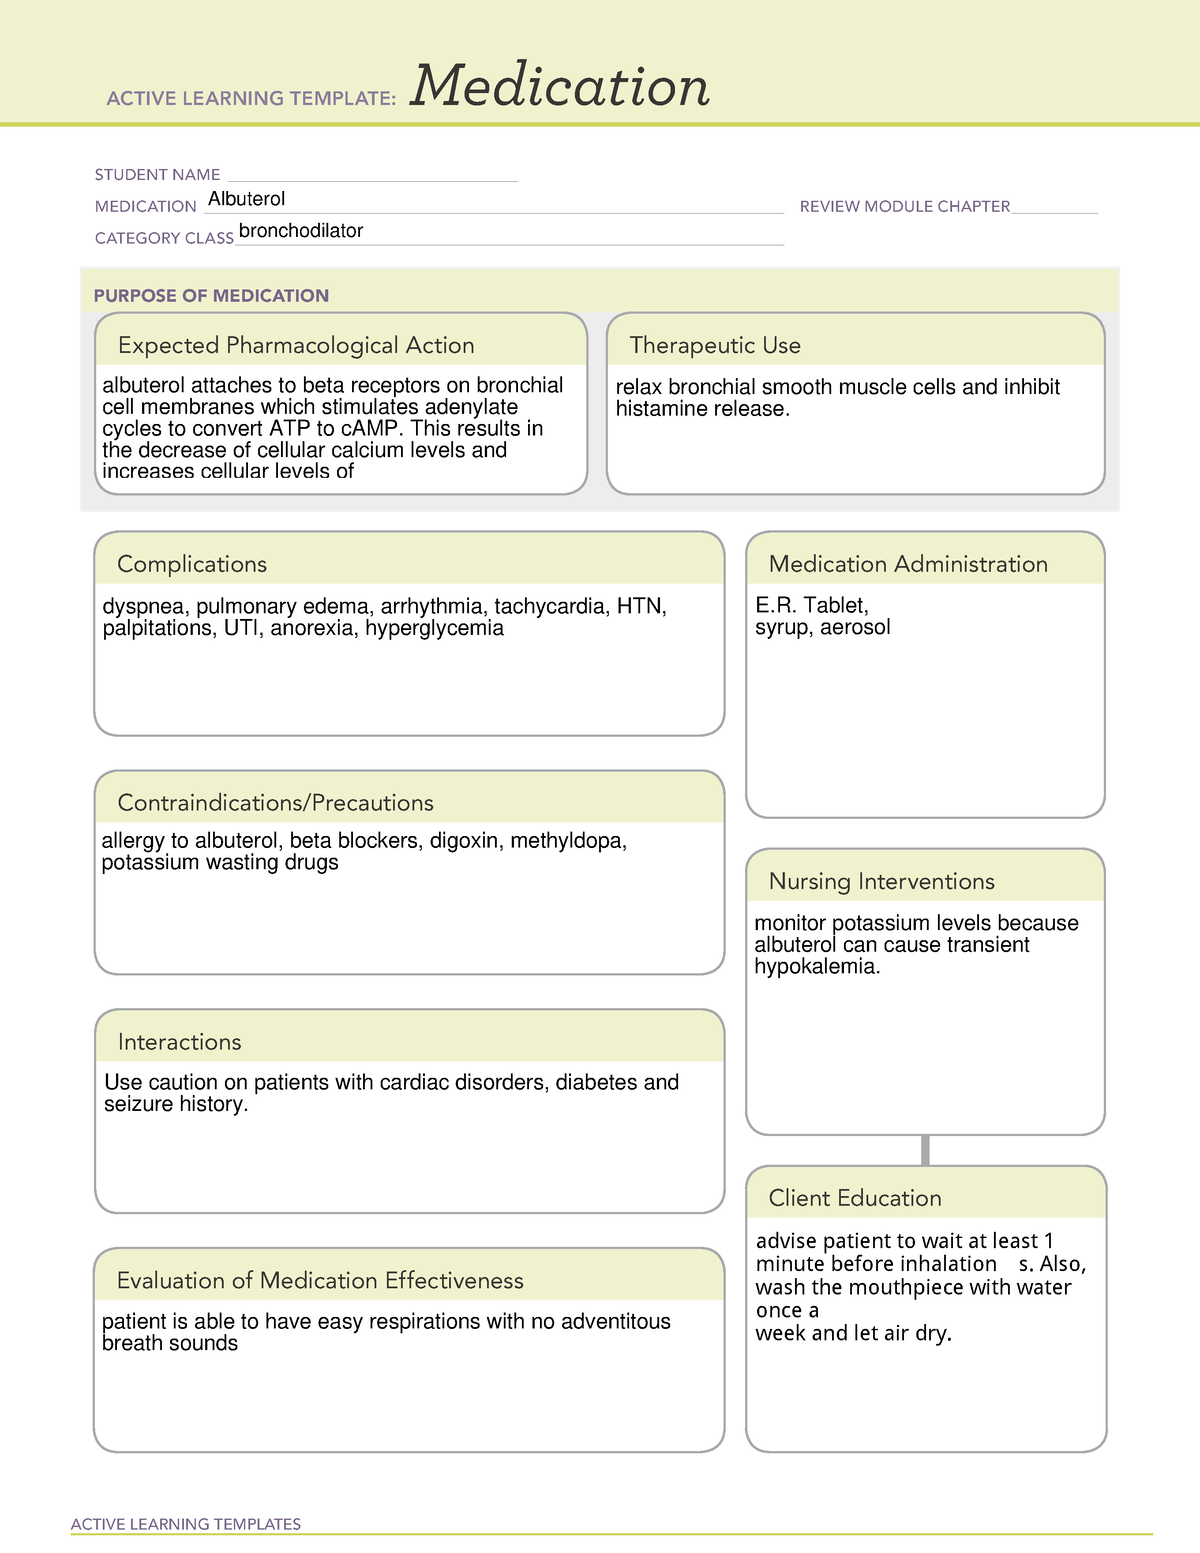 Medication learning template albuterol ACTIVE LEARNING TEMPLATES